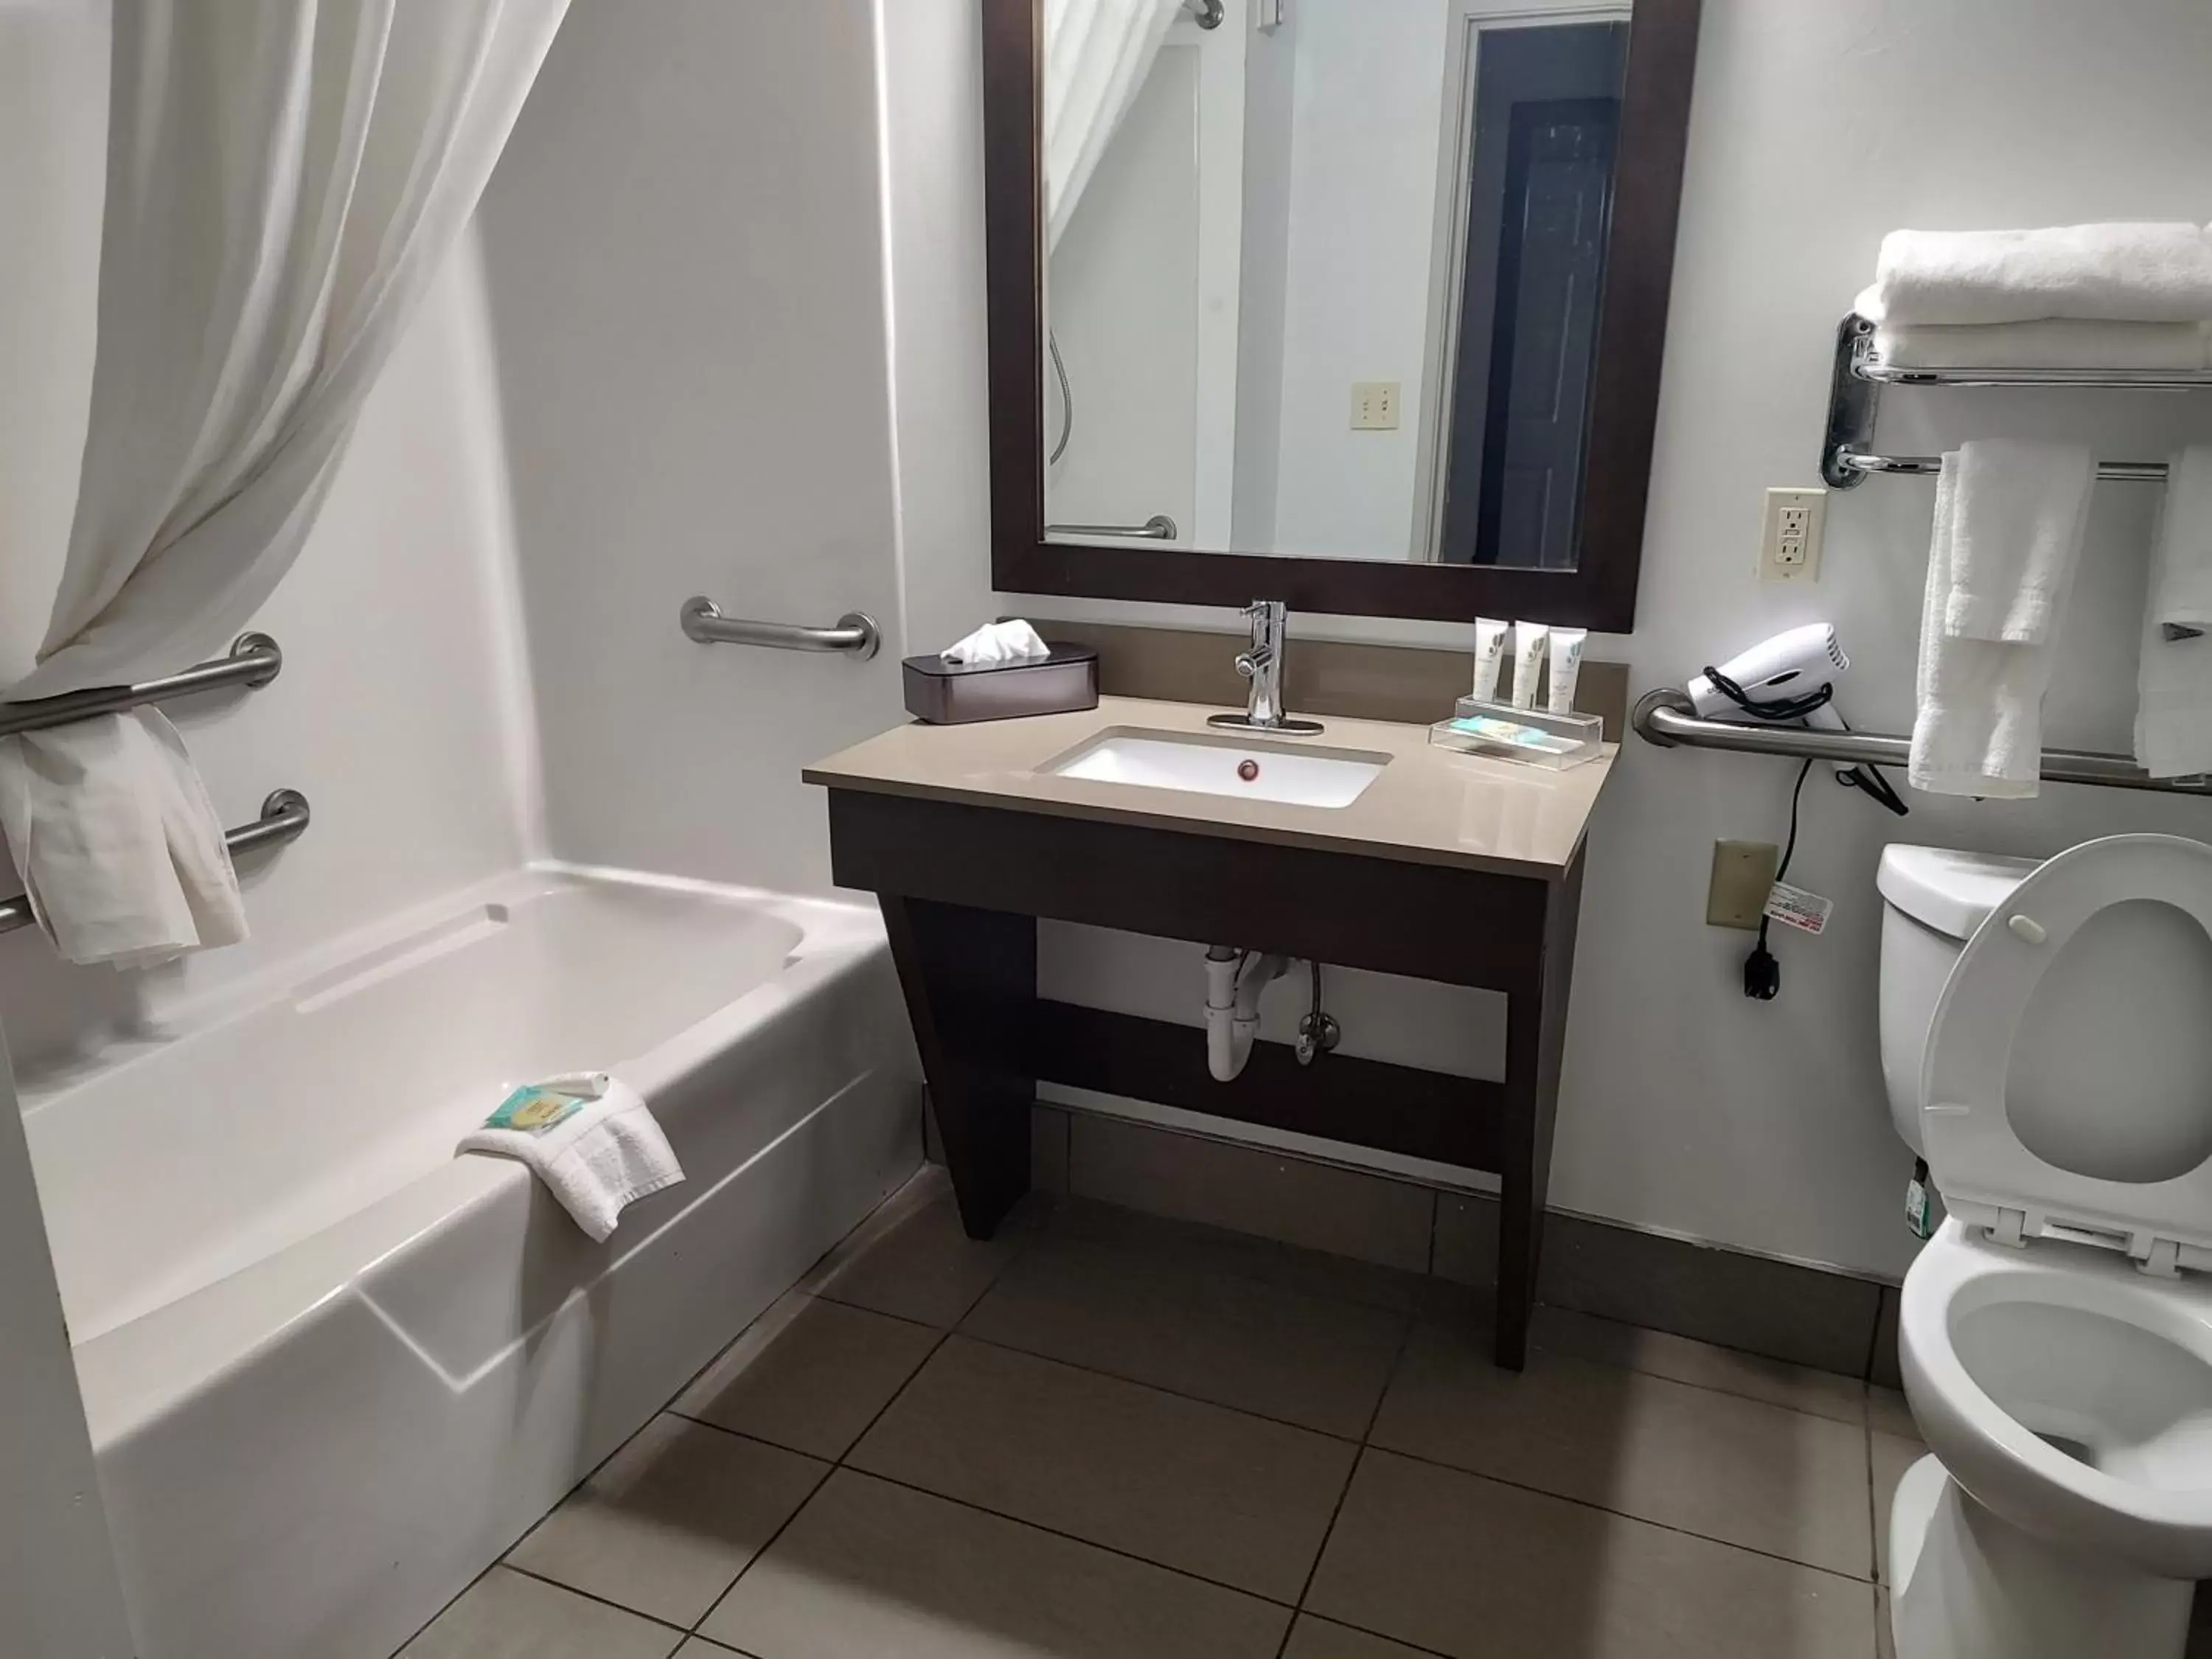 Bathroom in Country Inn & Suites by Radisson, Hinesville, GA